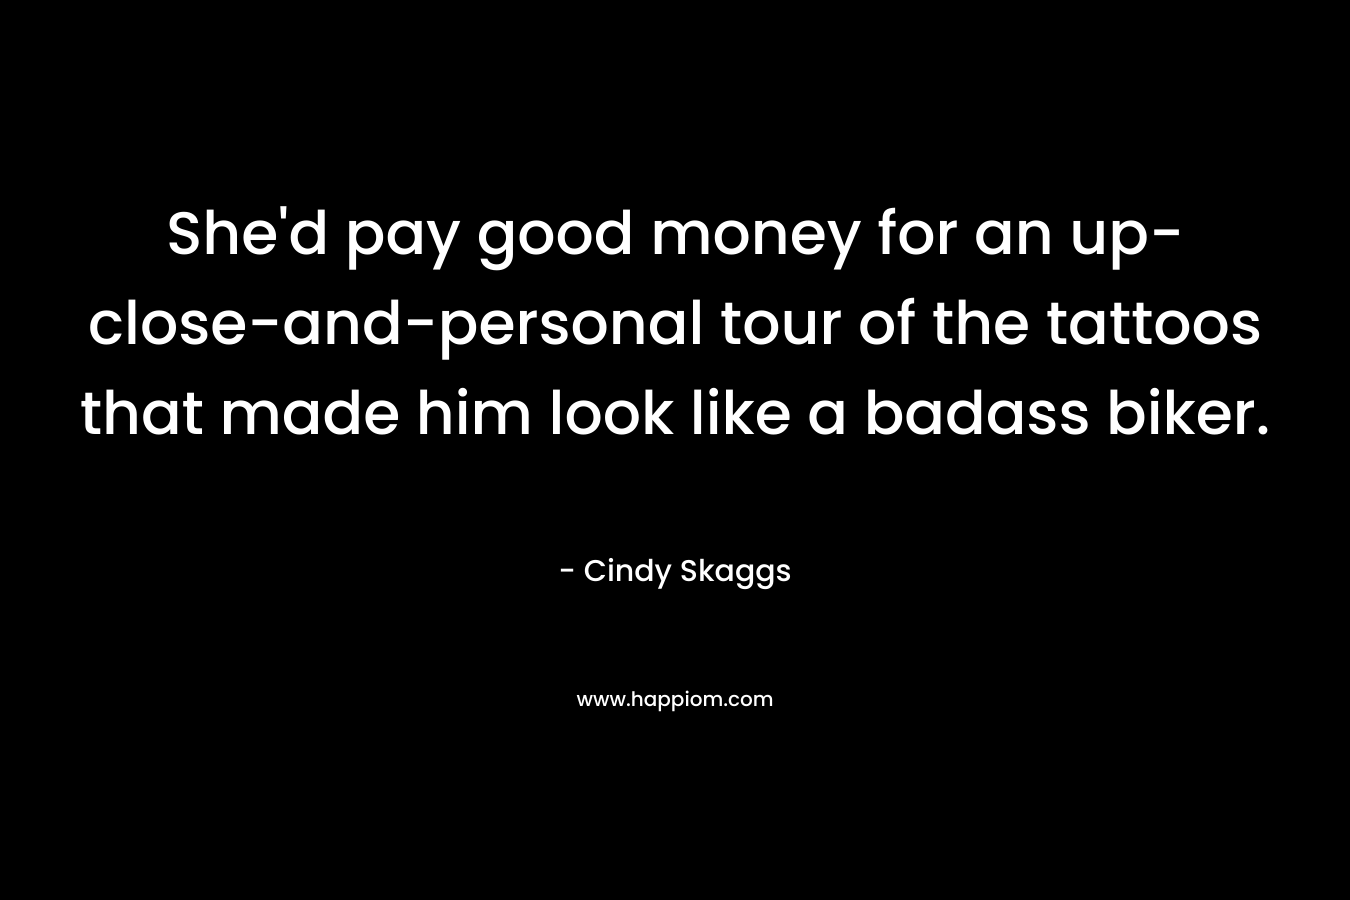 She’d pay good money for an up-close-and-personal tour of the tattoos that made him look like a badass biker. – Cindy Skaggs